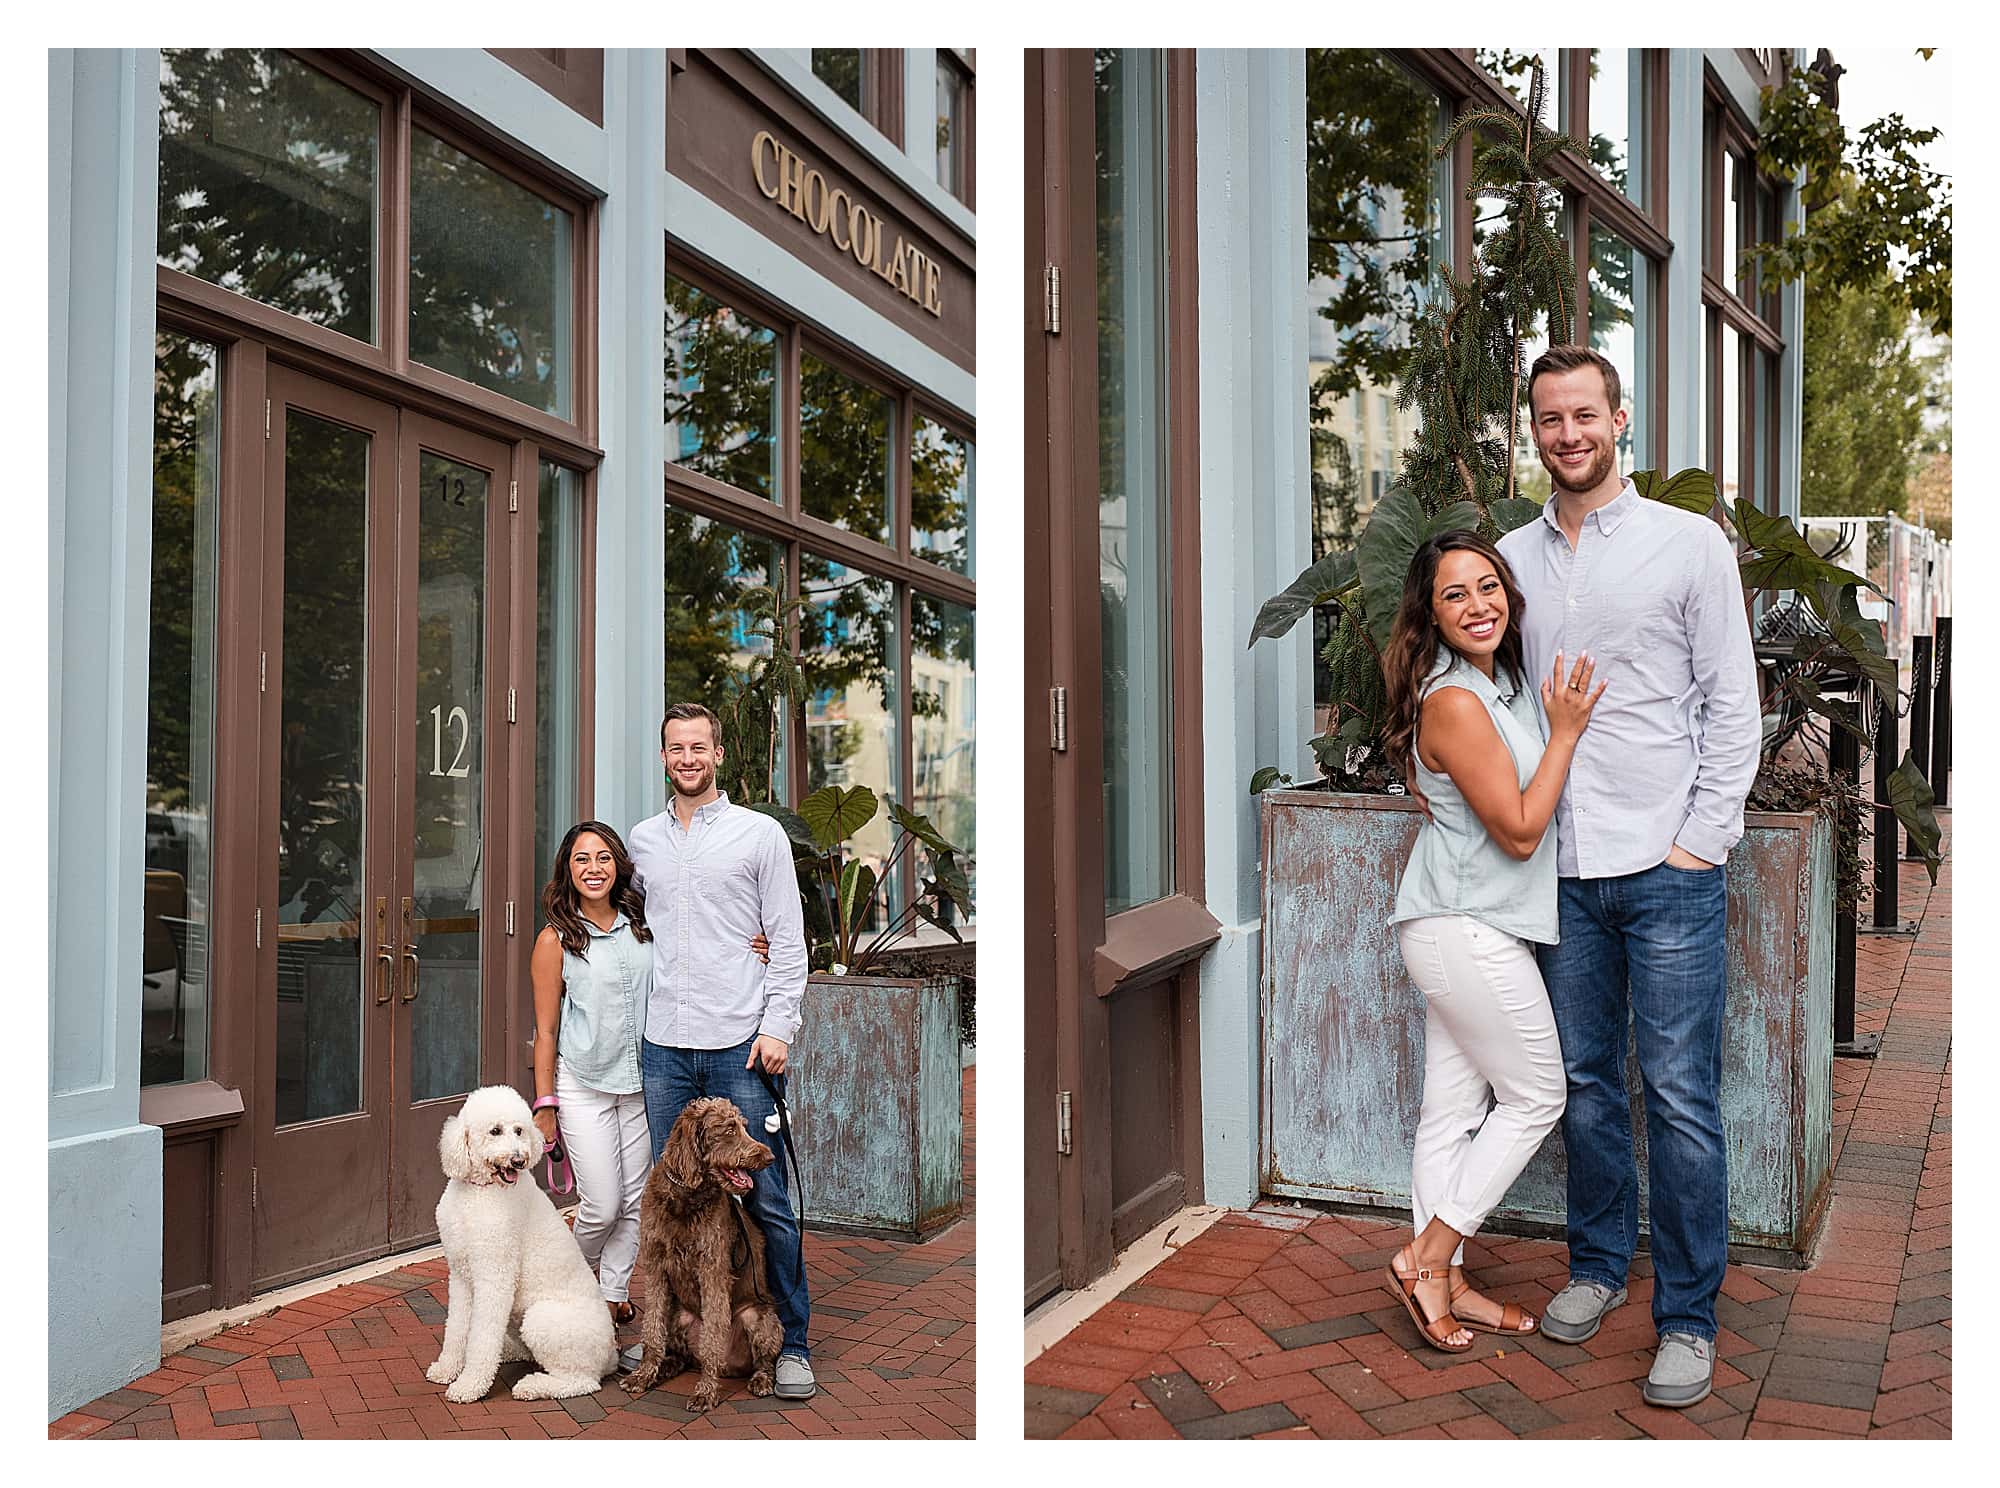 Young couple with arms around one another posing in front of store front smiling in downtown asheville